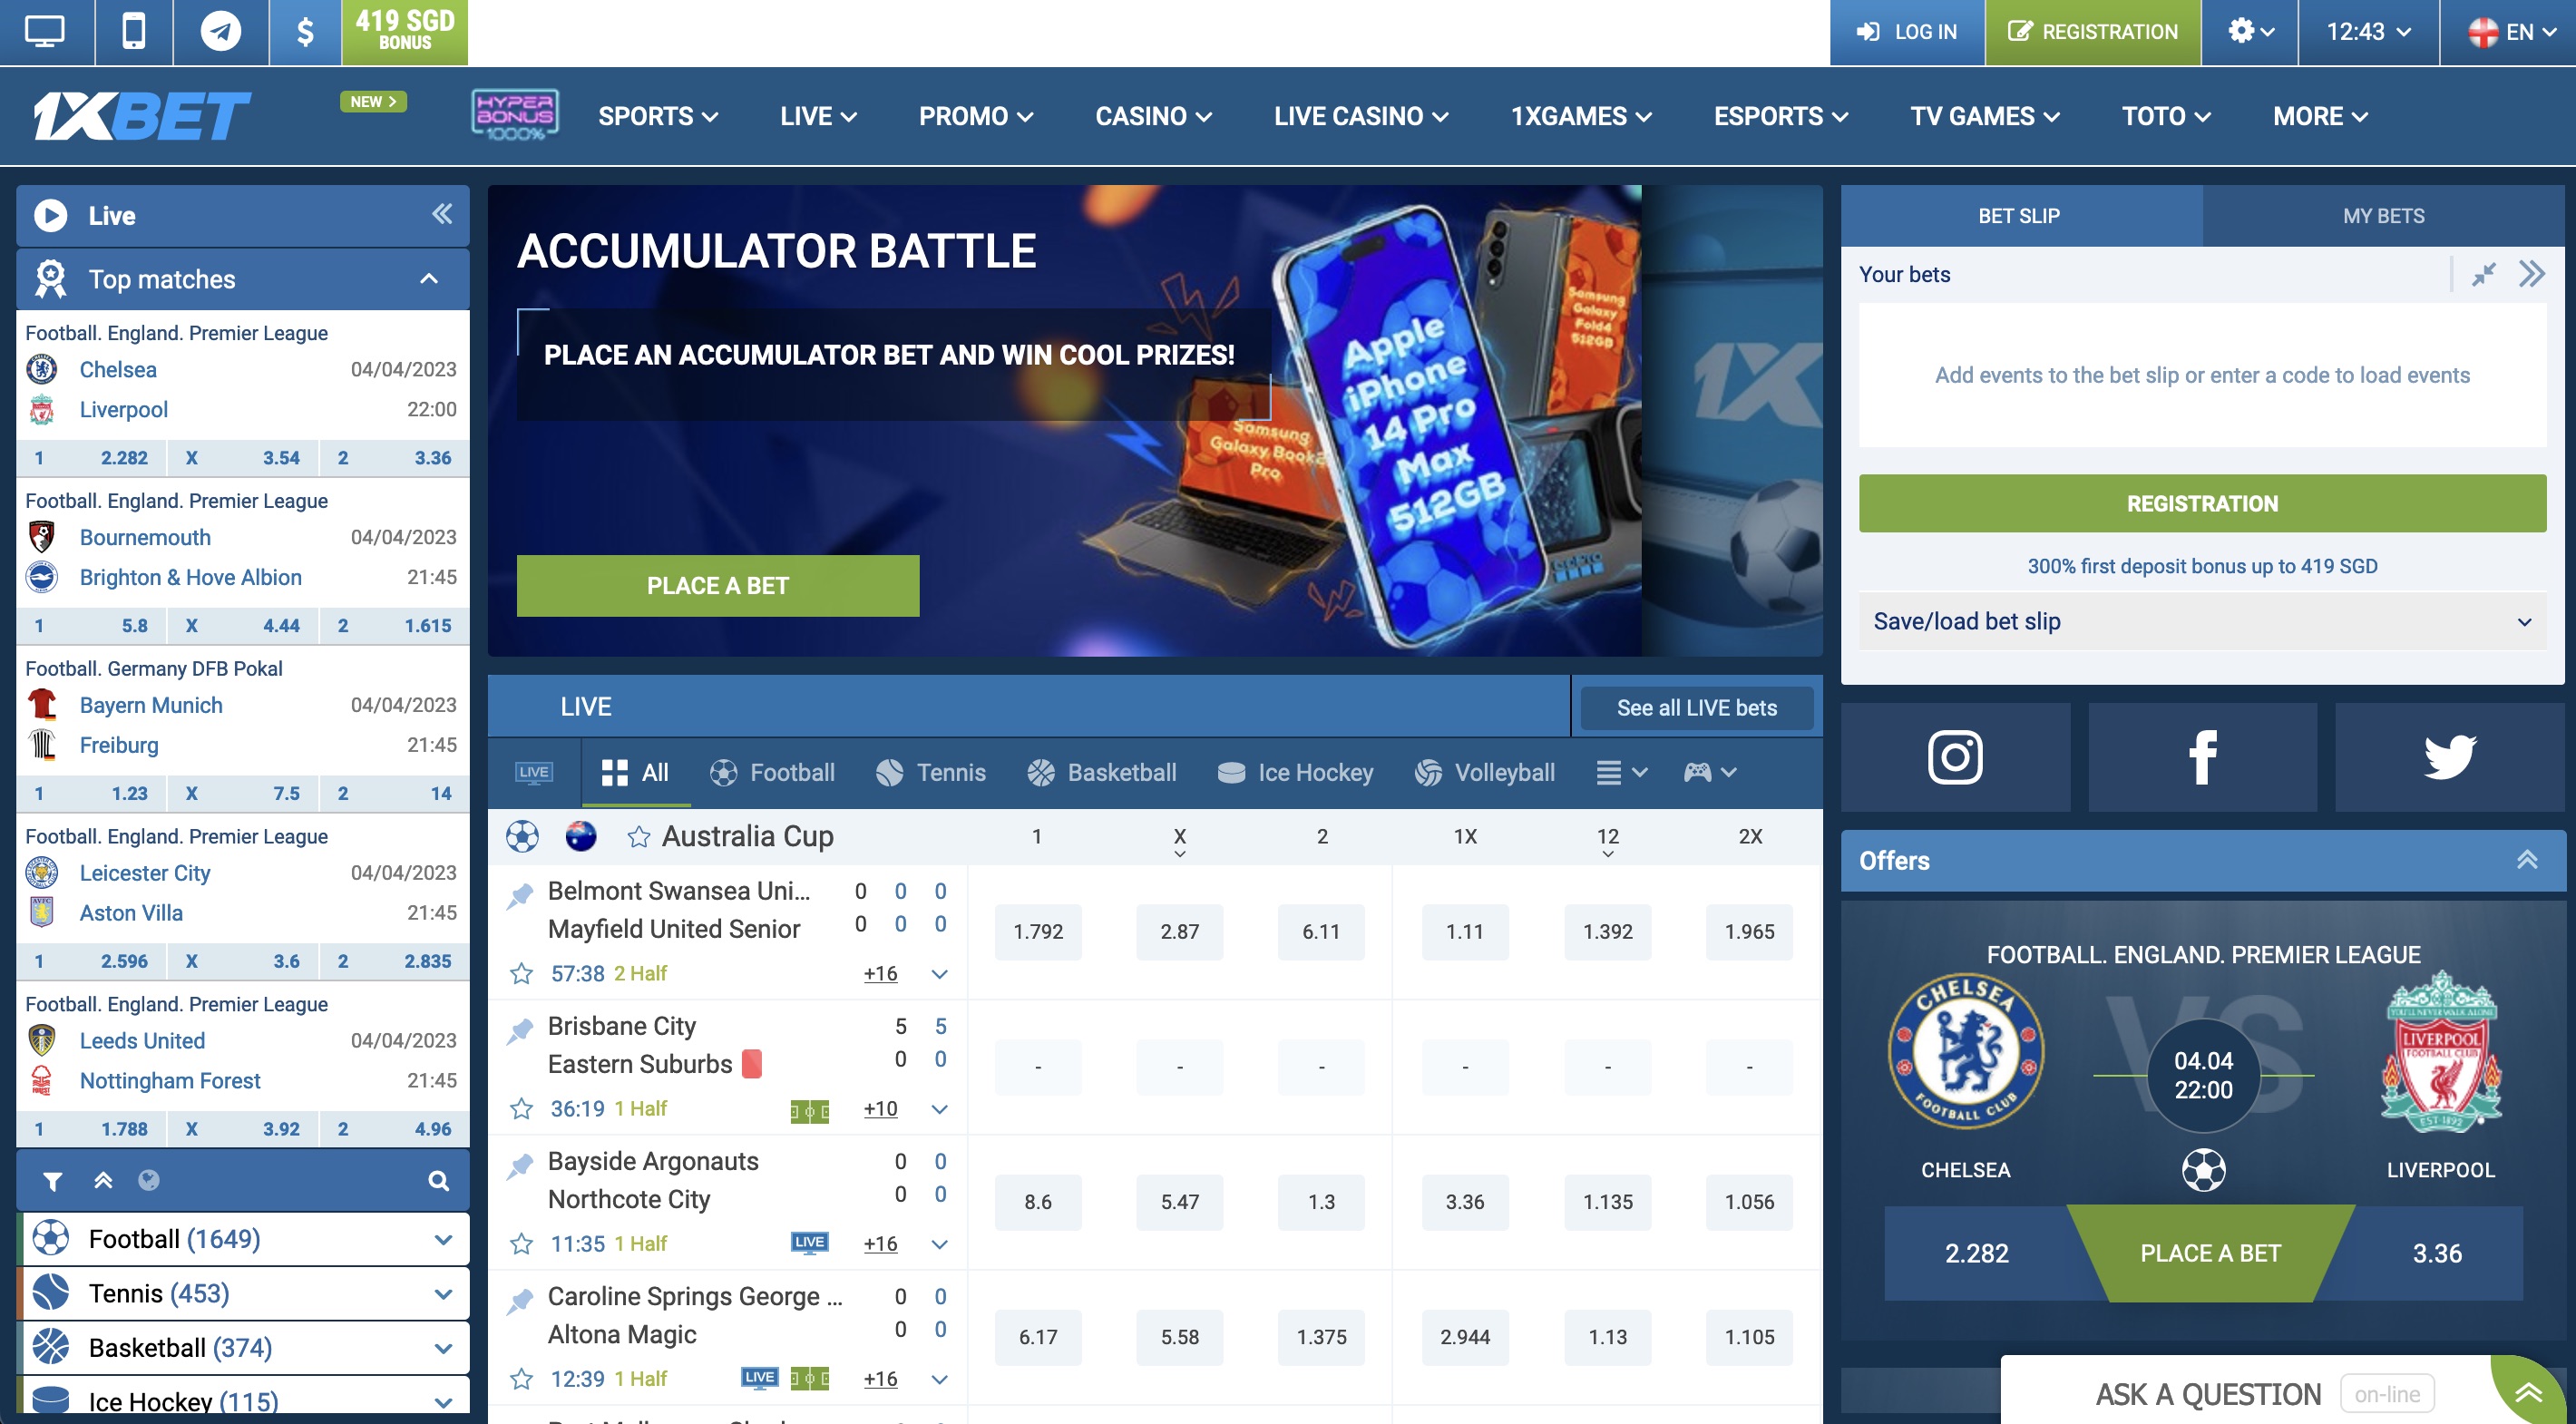 Bookmaker company 1xBet